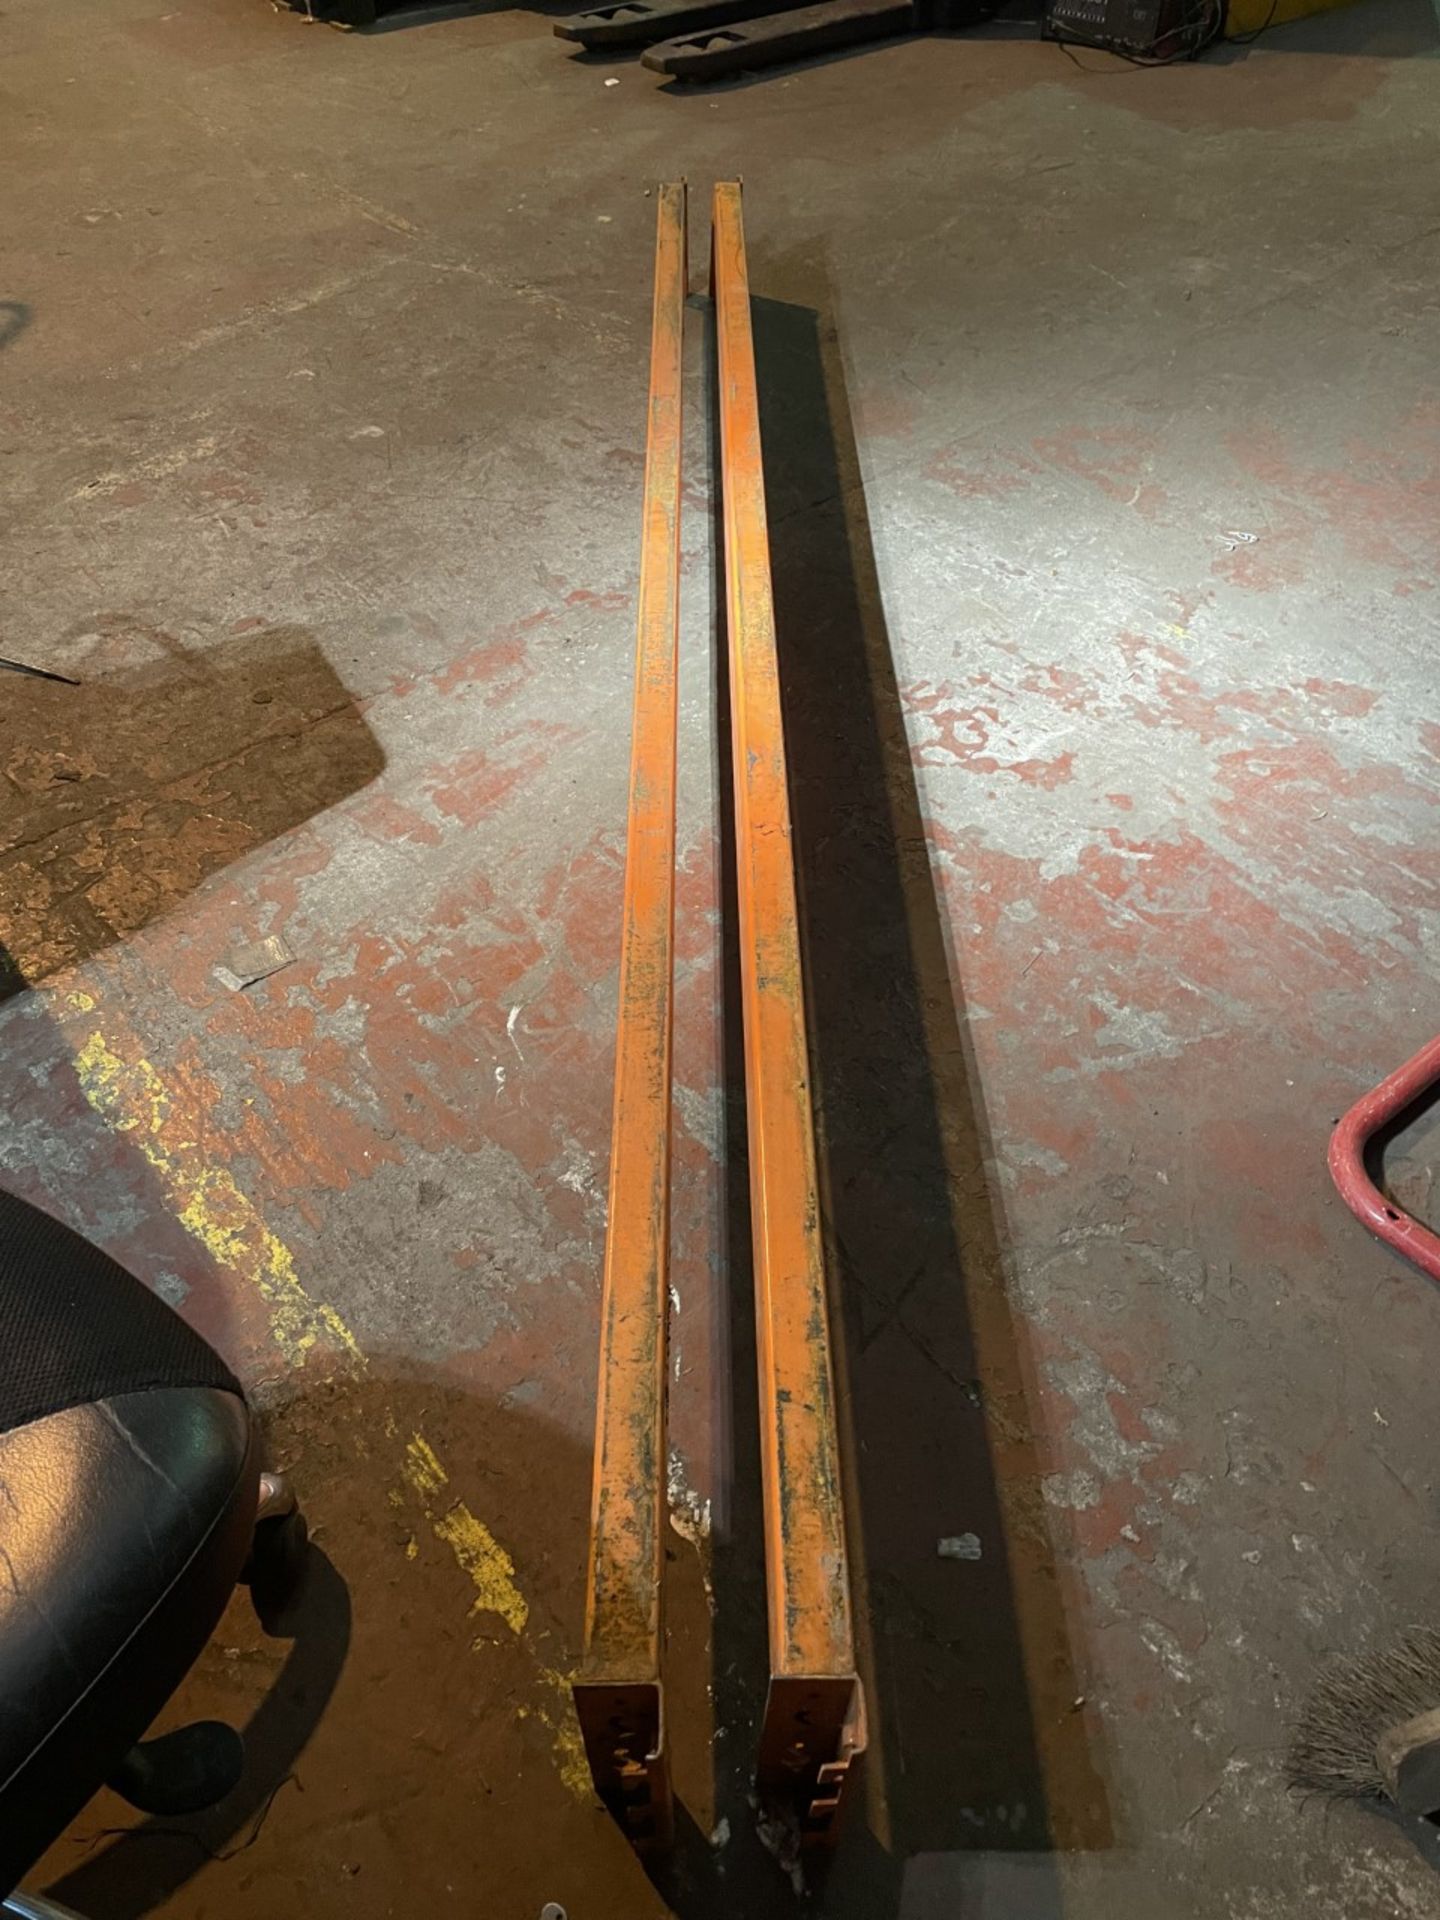 2x orange racking beams. Good condition all connections are straight and intact